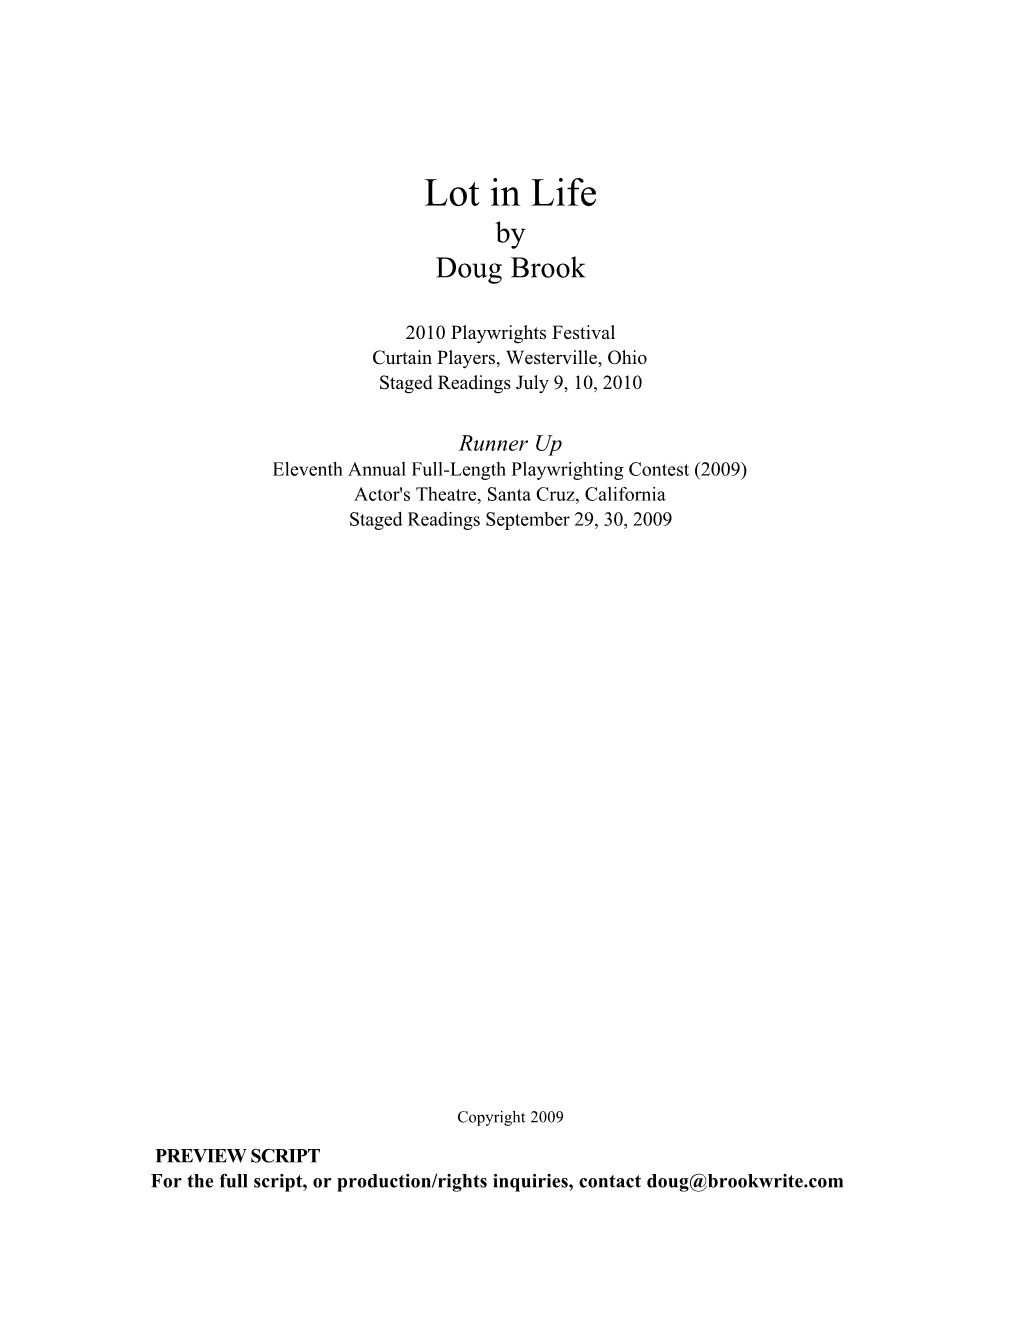 Lot in Life by Doug Brook